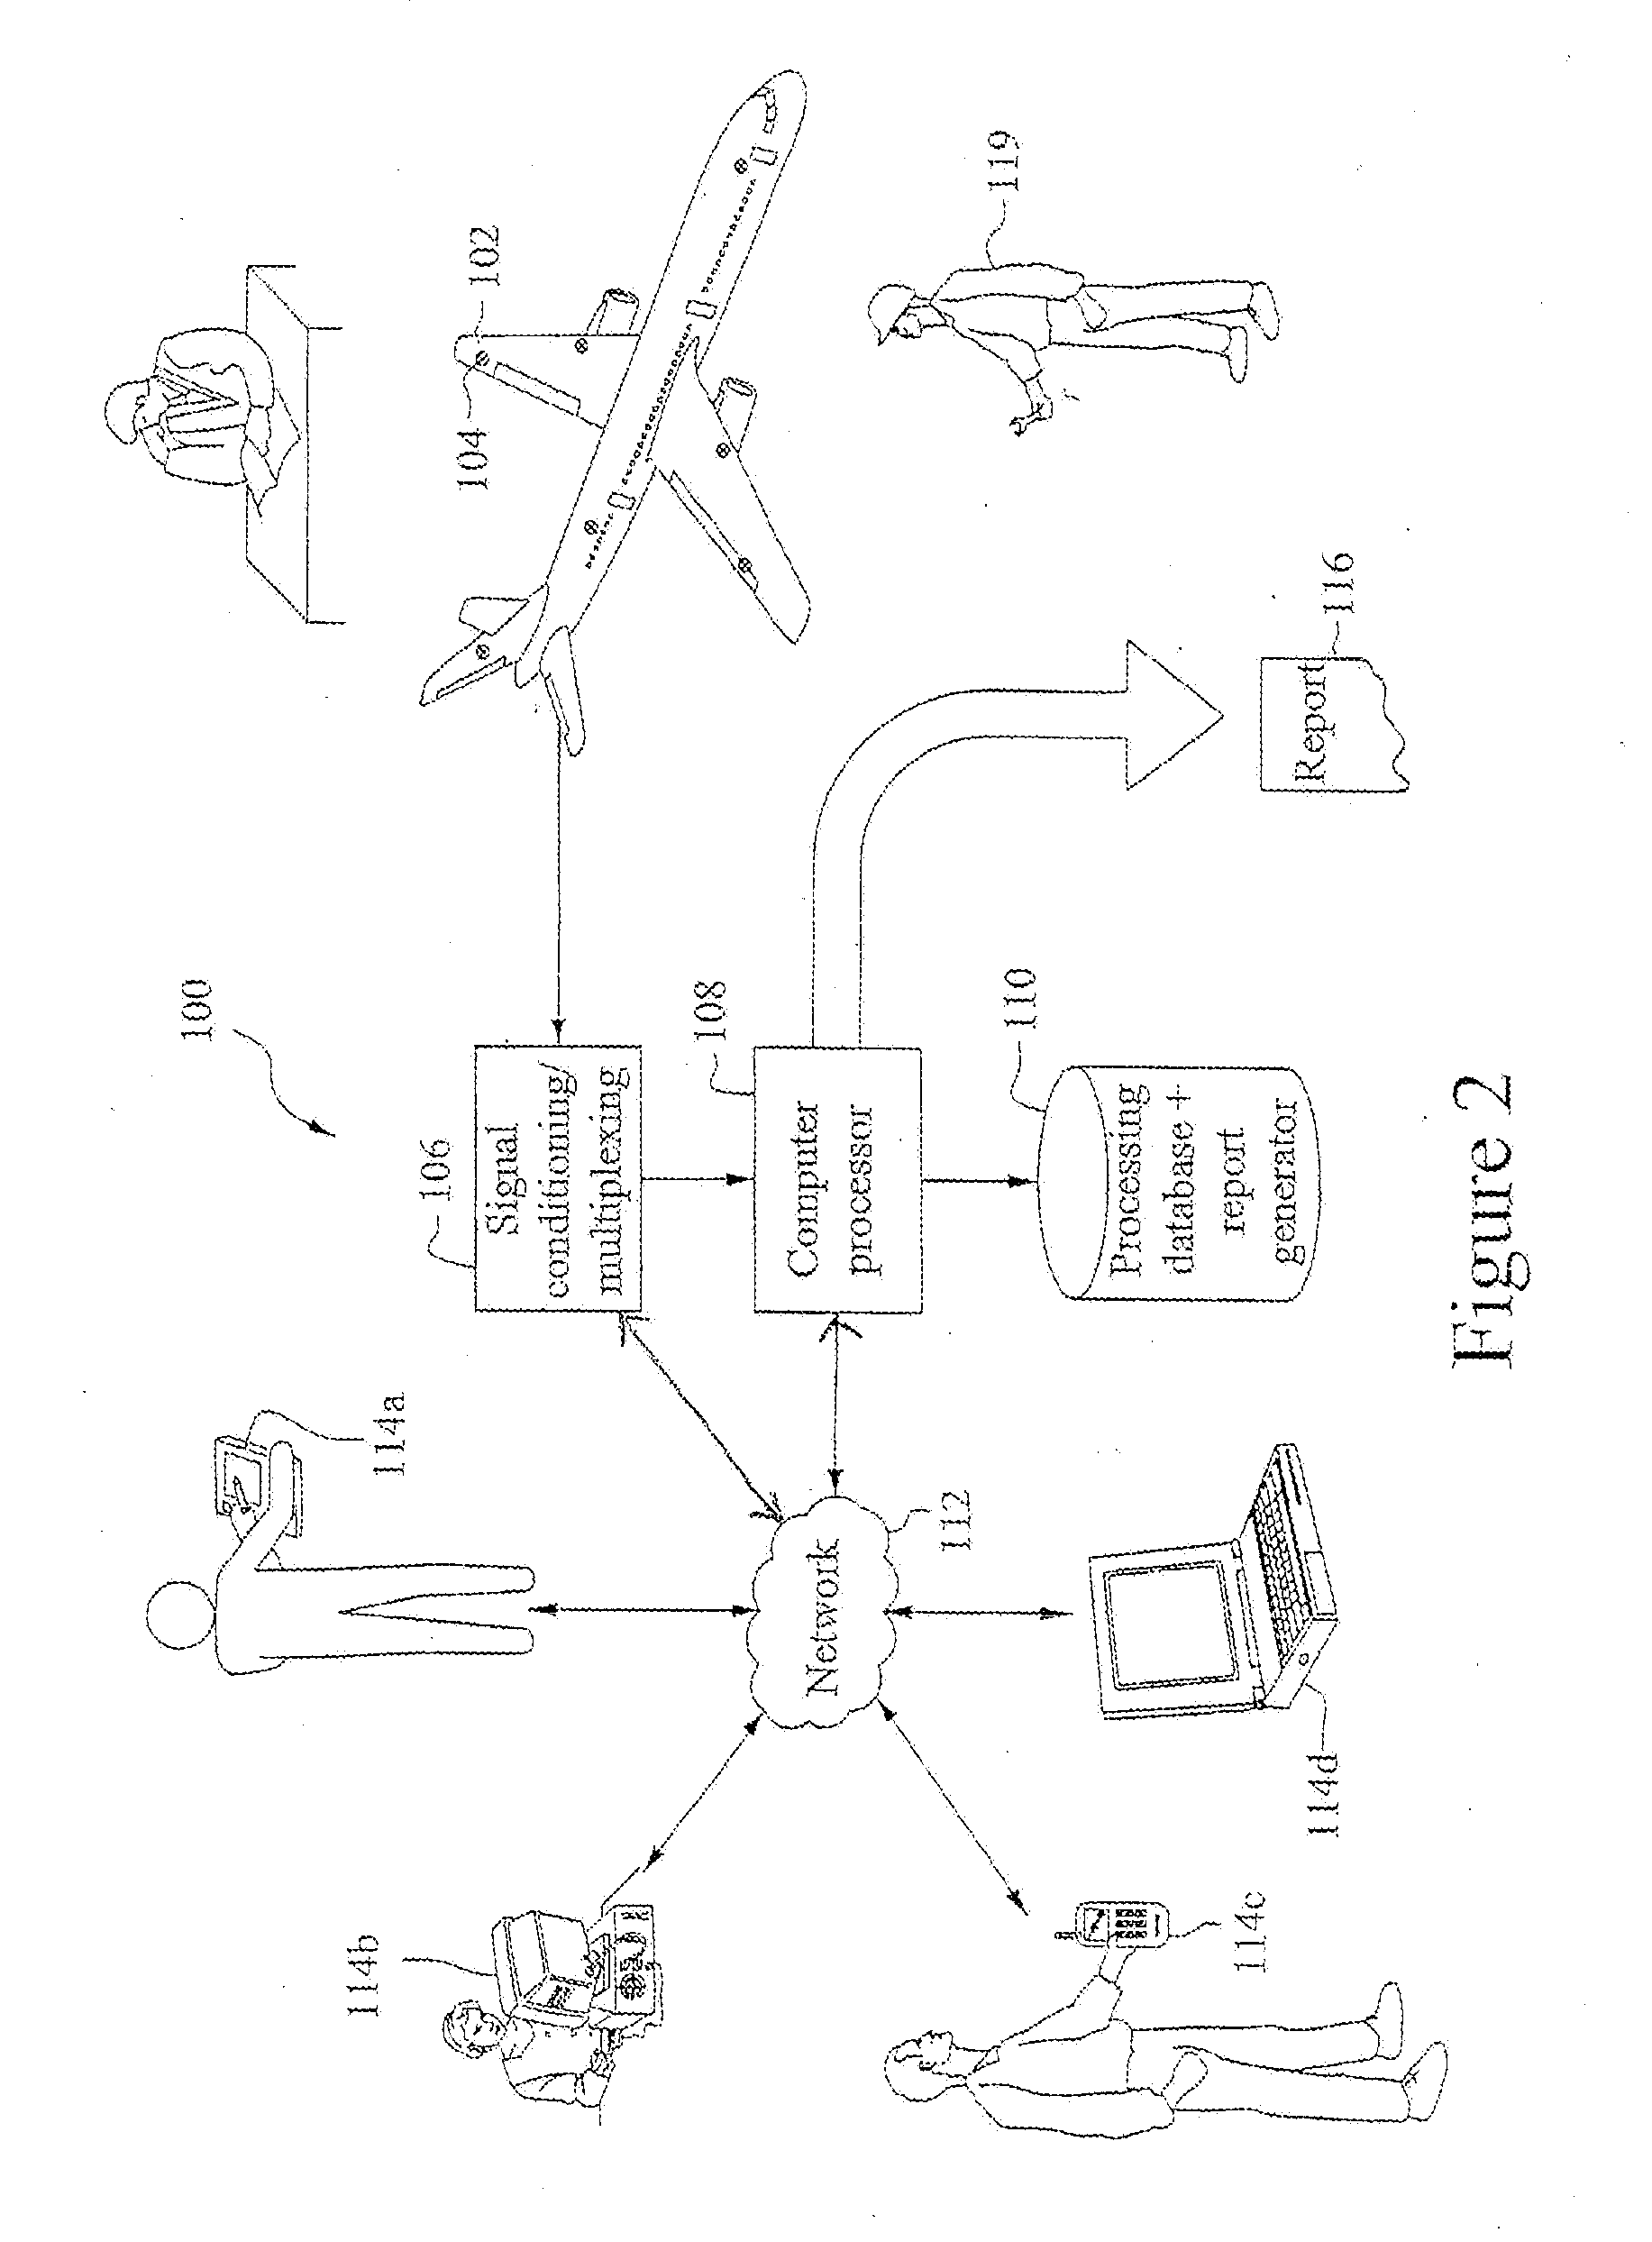 System and method for remote and automatic assessment of structural damage and repair